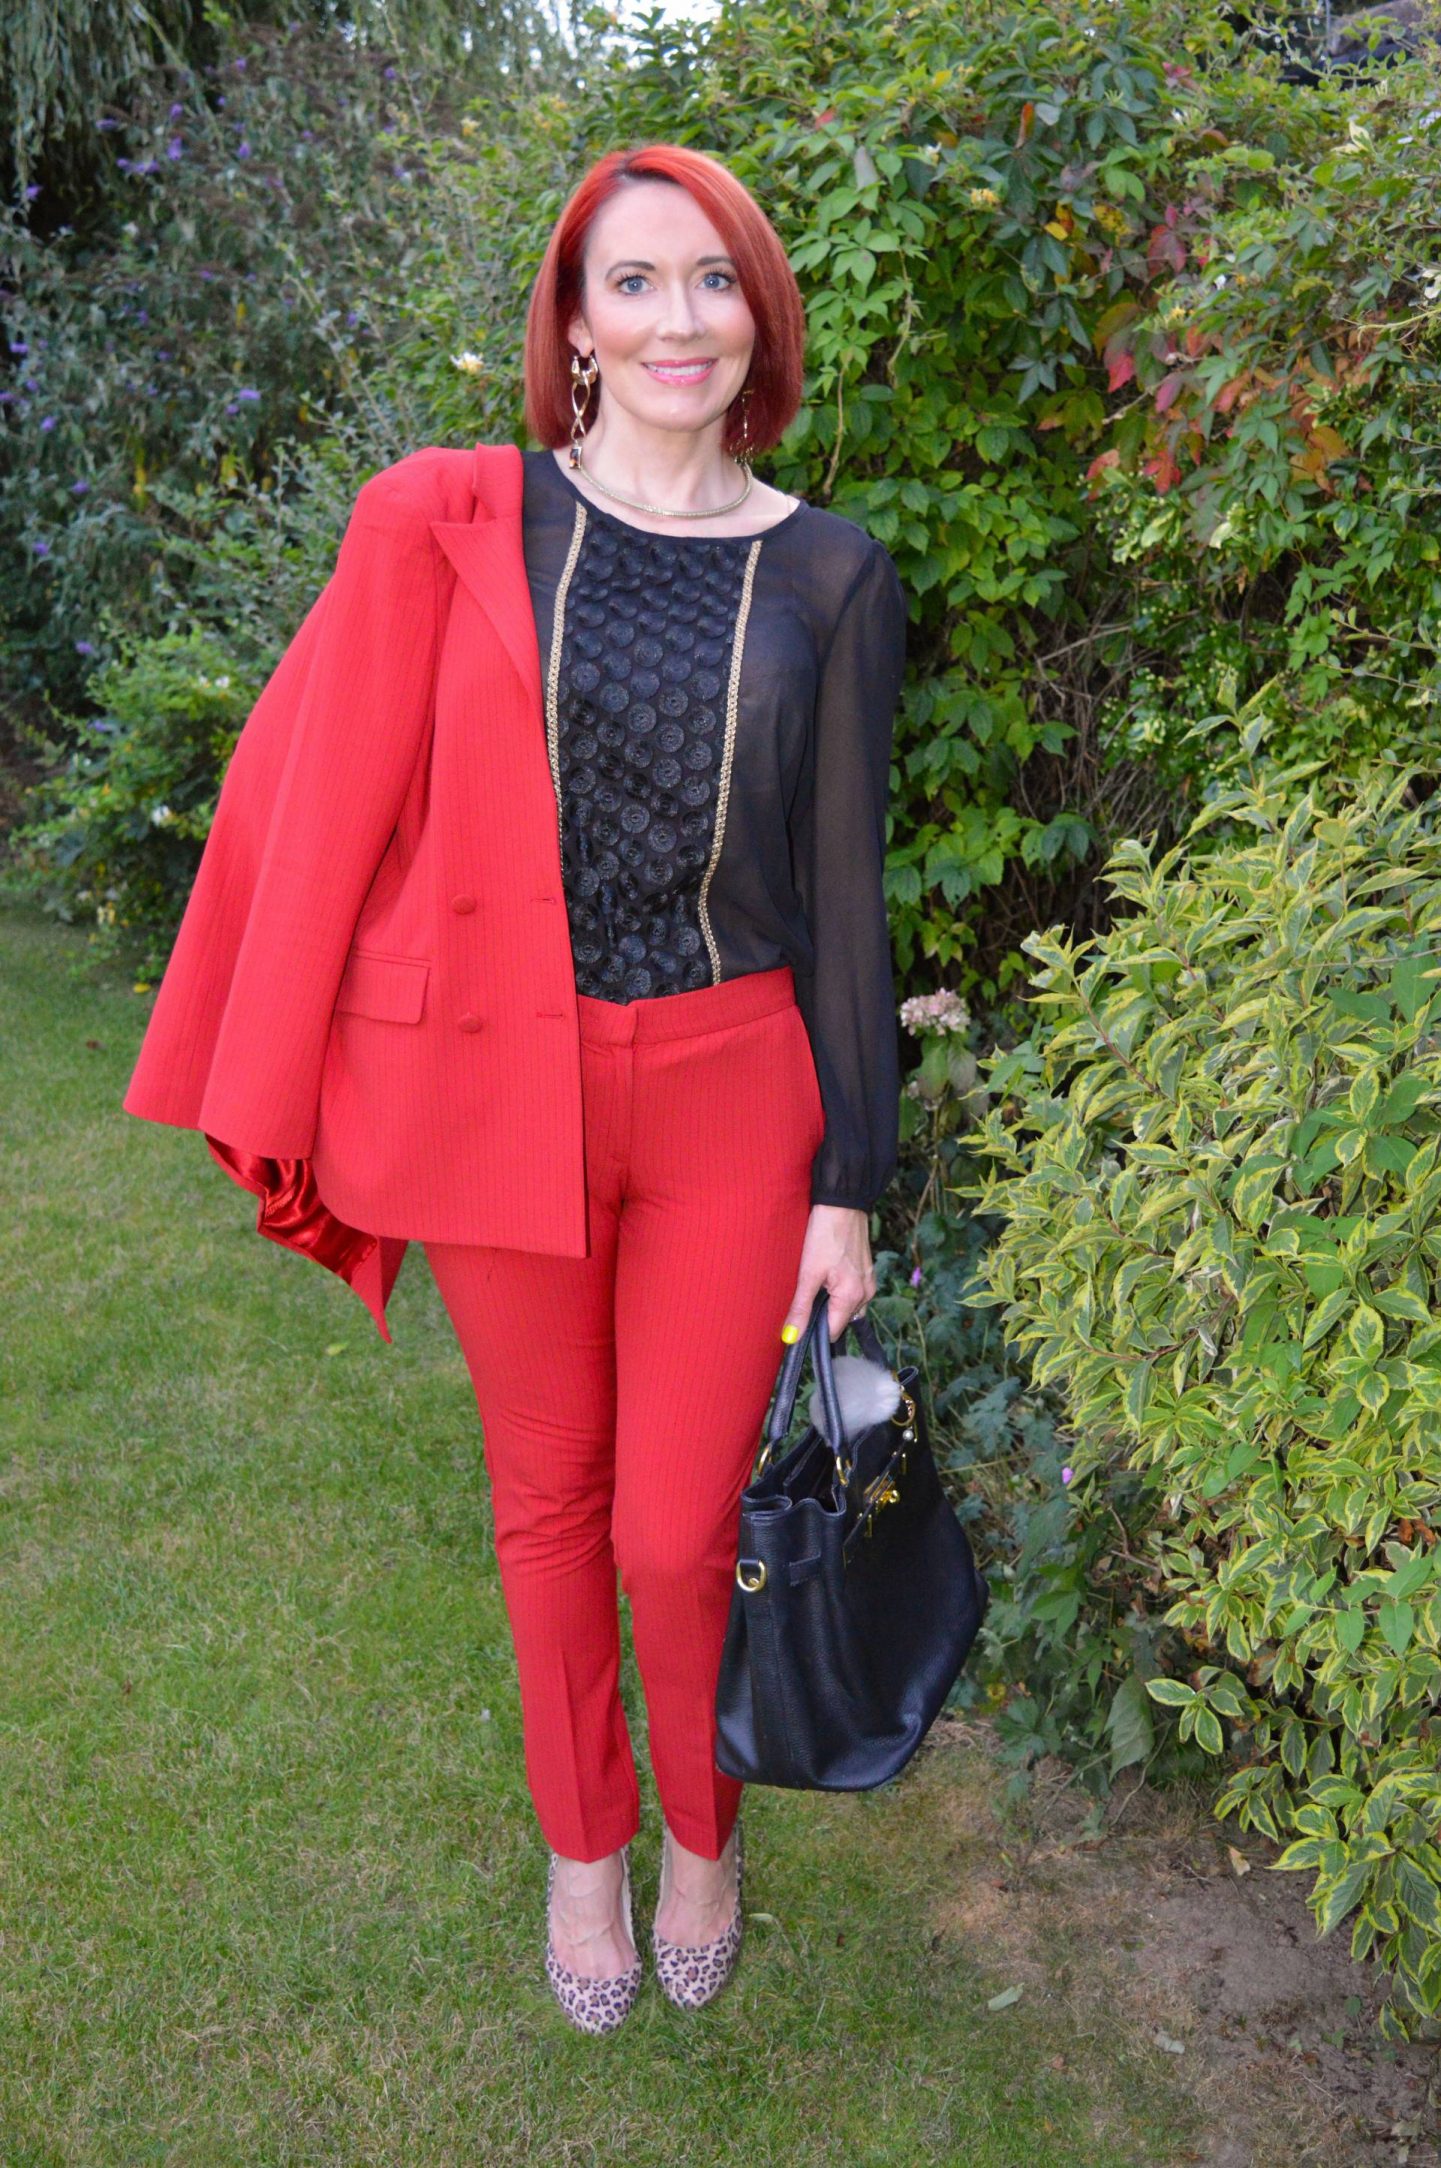 Red Alert Trouser Suit, Style & Suit Red Alert blazer and trousers, Marks & Spencer black sheer blouse, New Look leopard print shoes